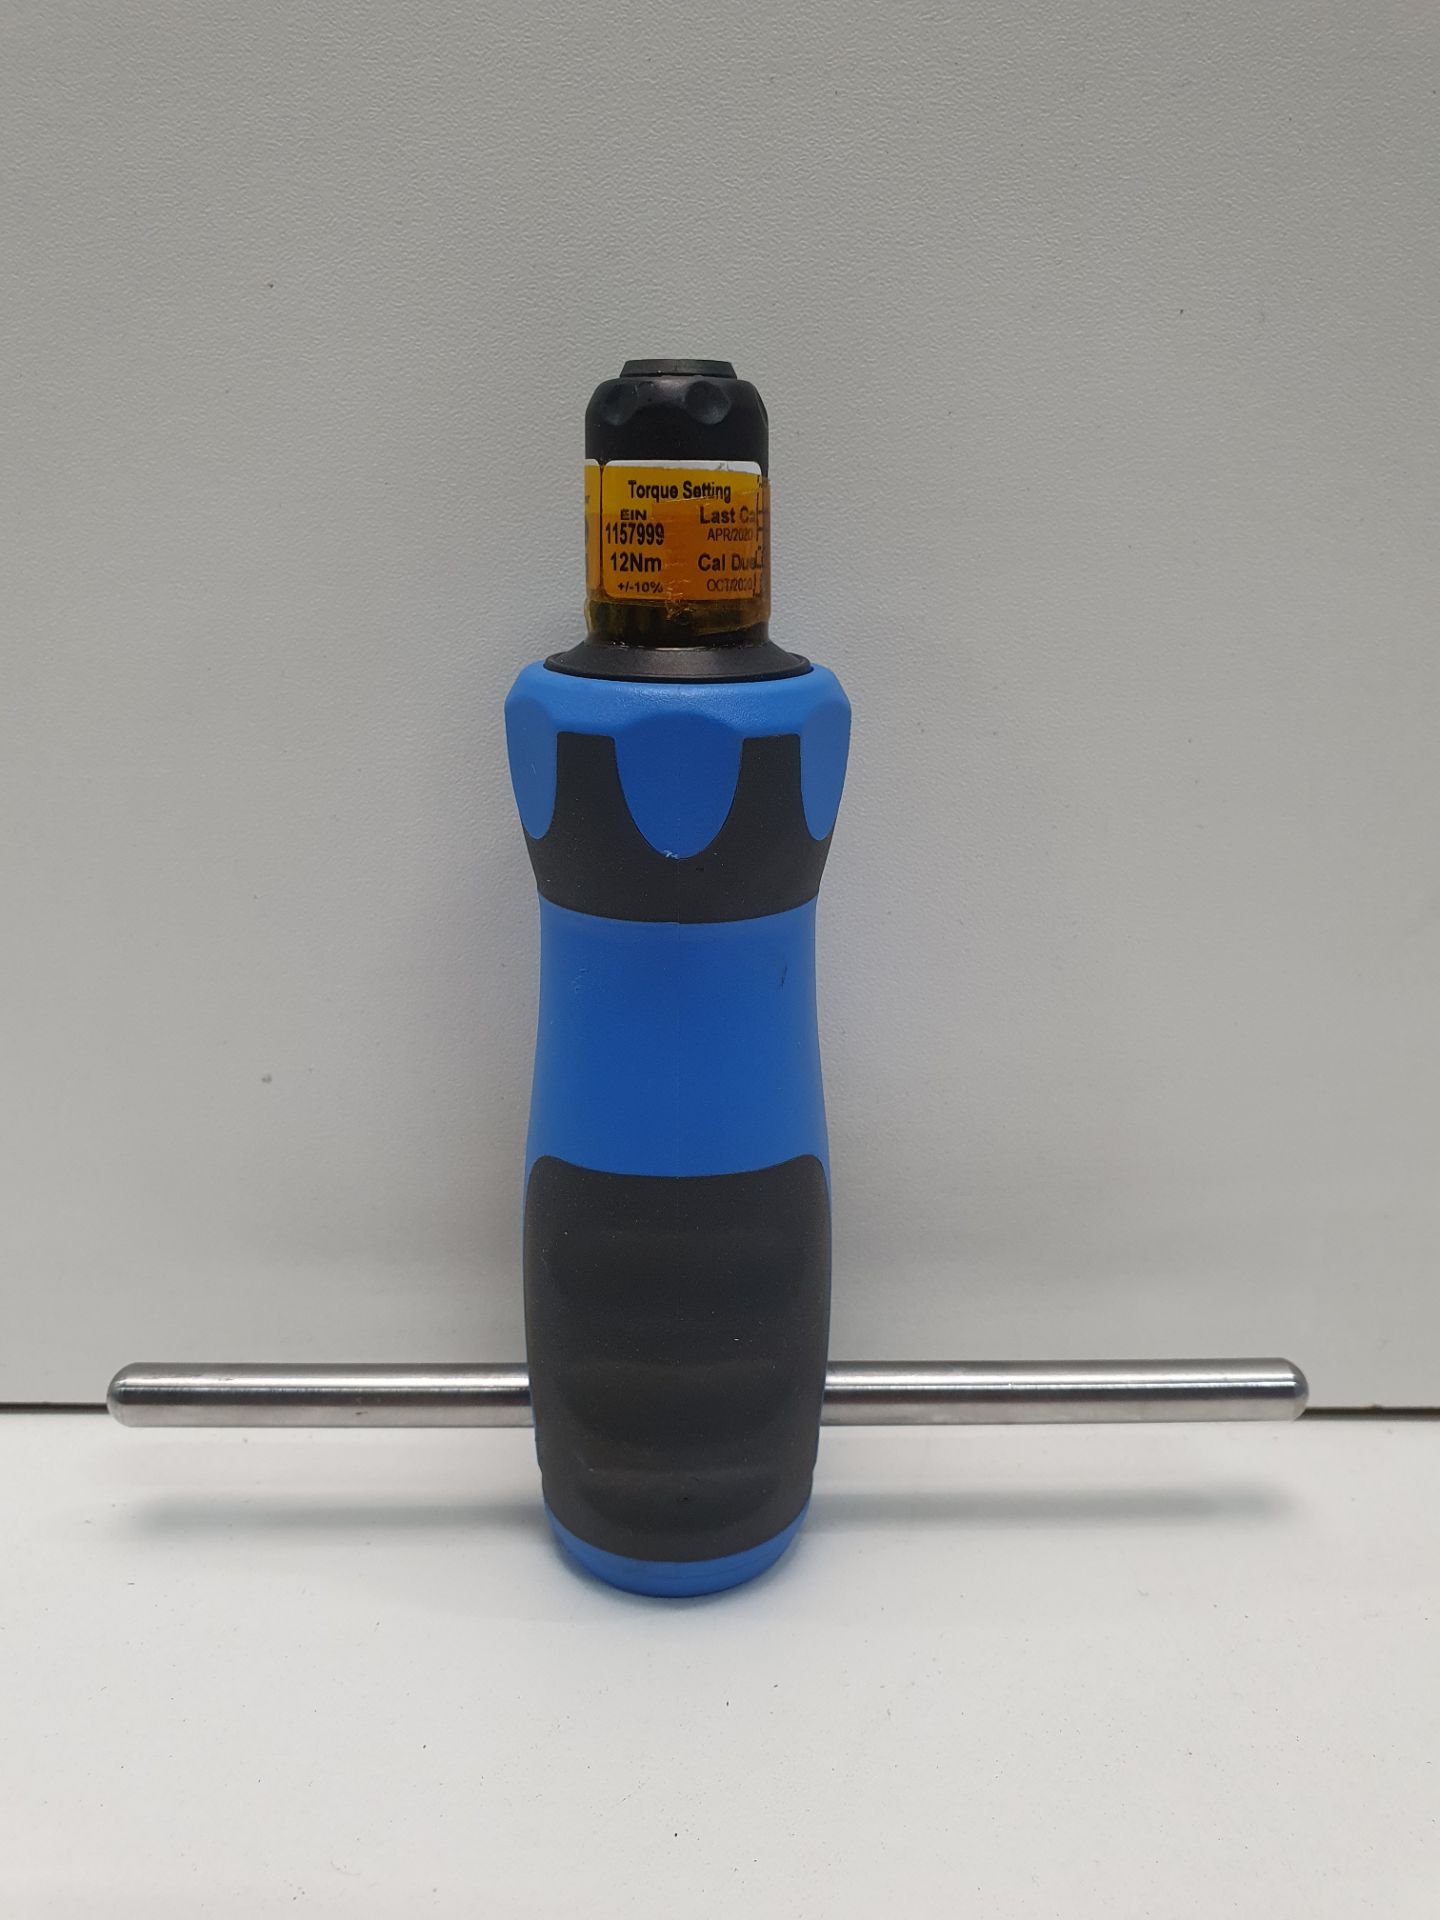 Gedore 1/4 in Hex Pre-Settable Torque Screwdriver, 2.5 ? 13.5Nm With Bar - Image 2 of 3